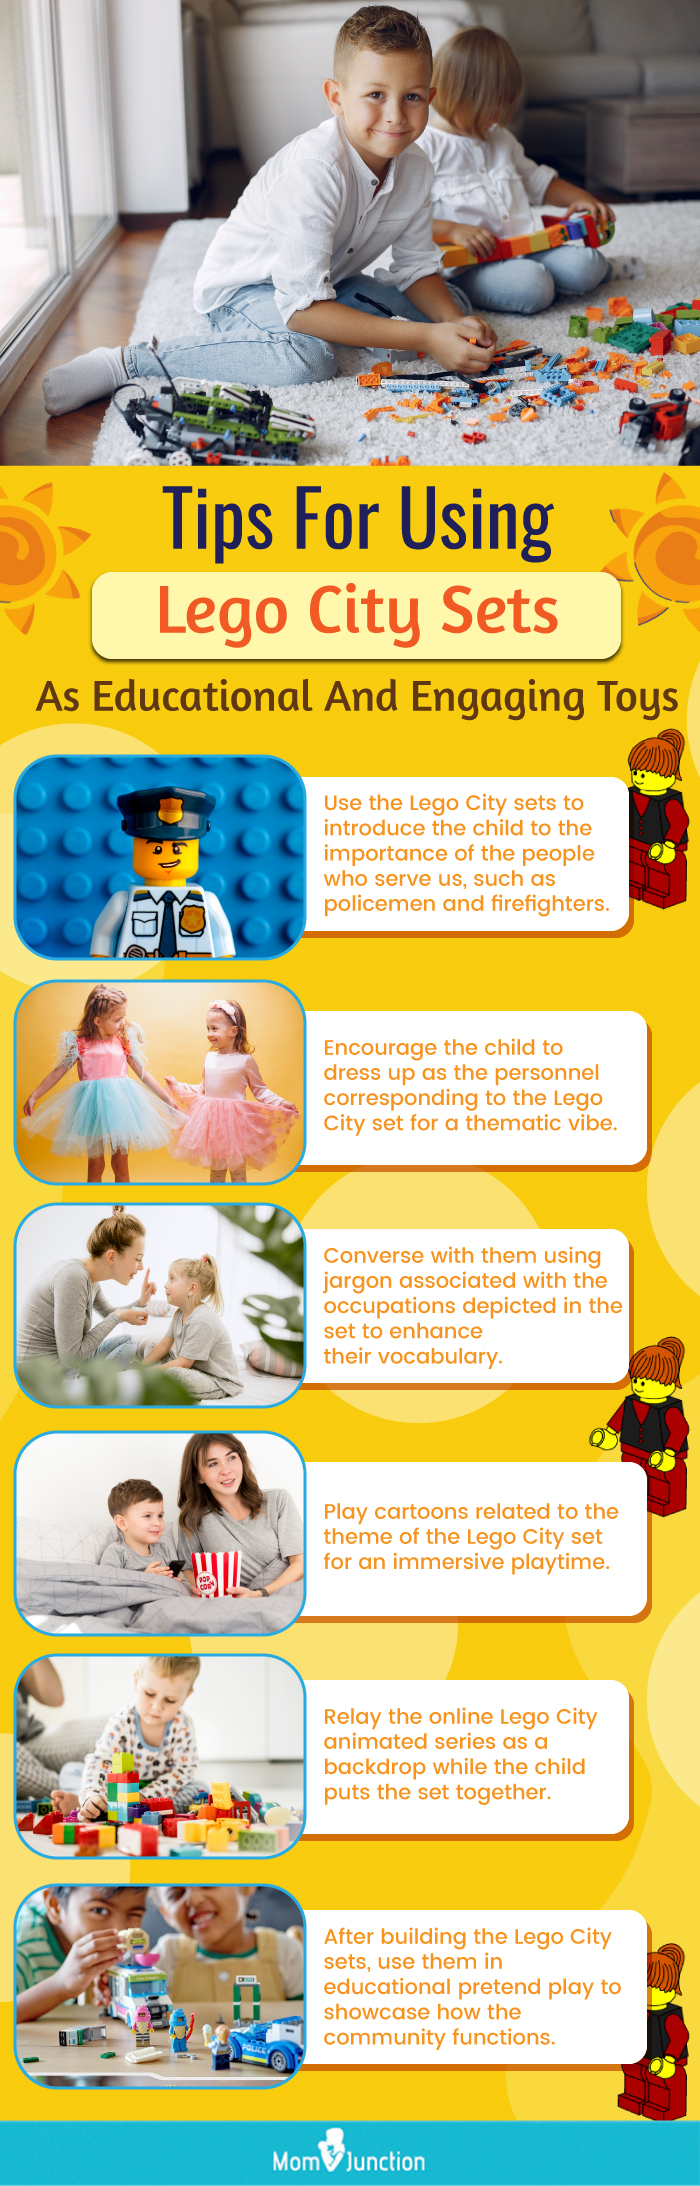 Tips For Using Lego City Sets As Educational And Engaging Toys (infographic)